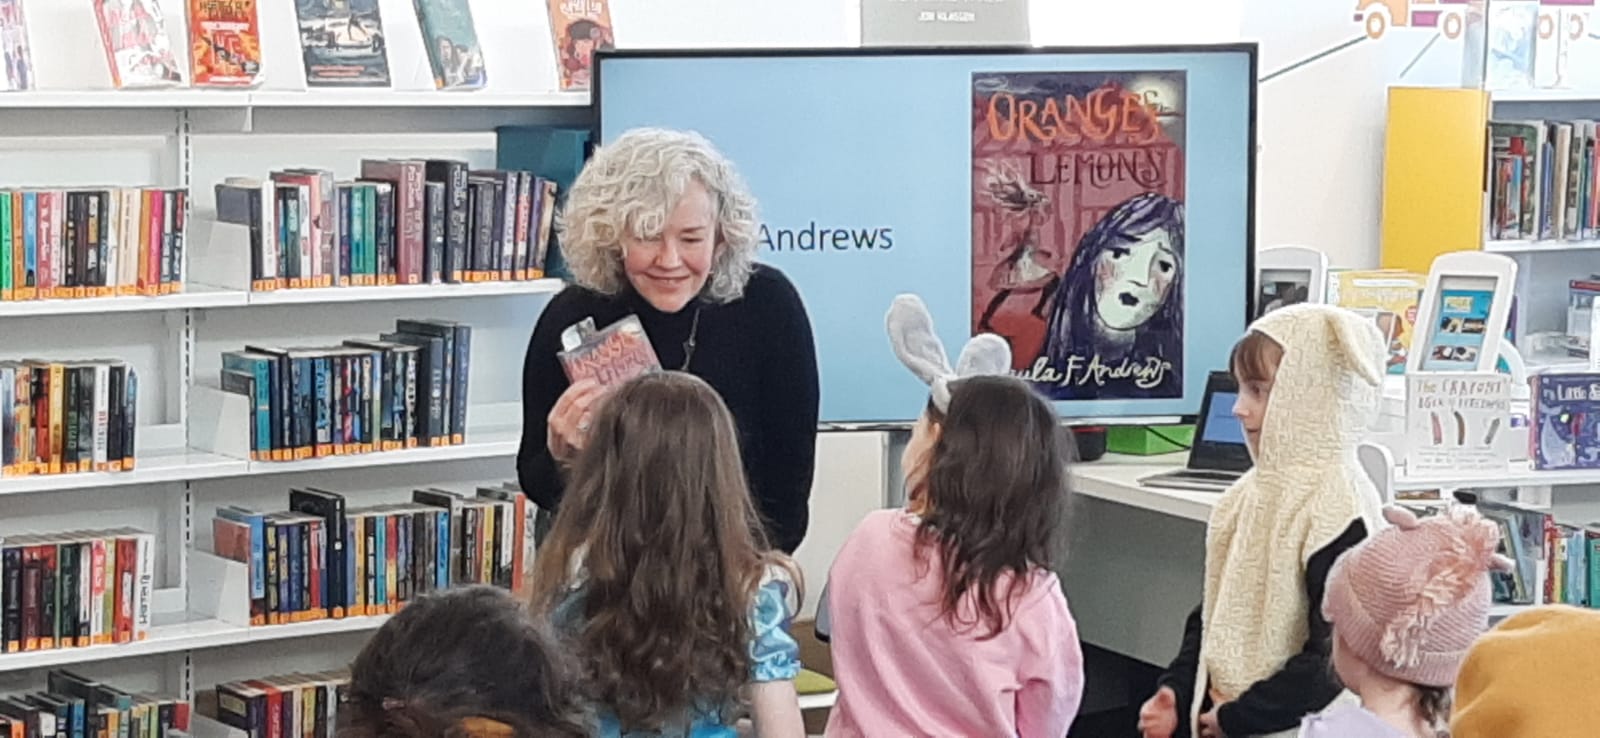 Paula leans into her young audience to talk about the cover of Oranges and Lemons